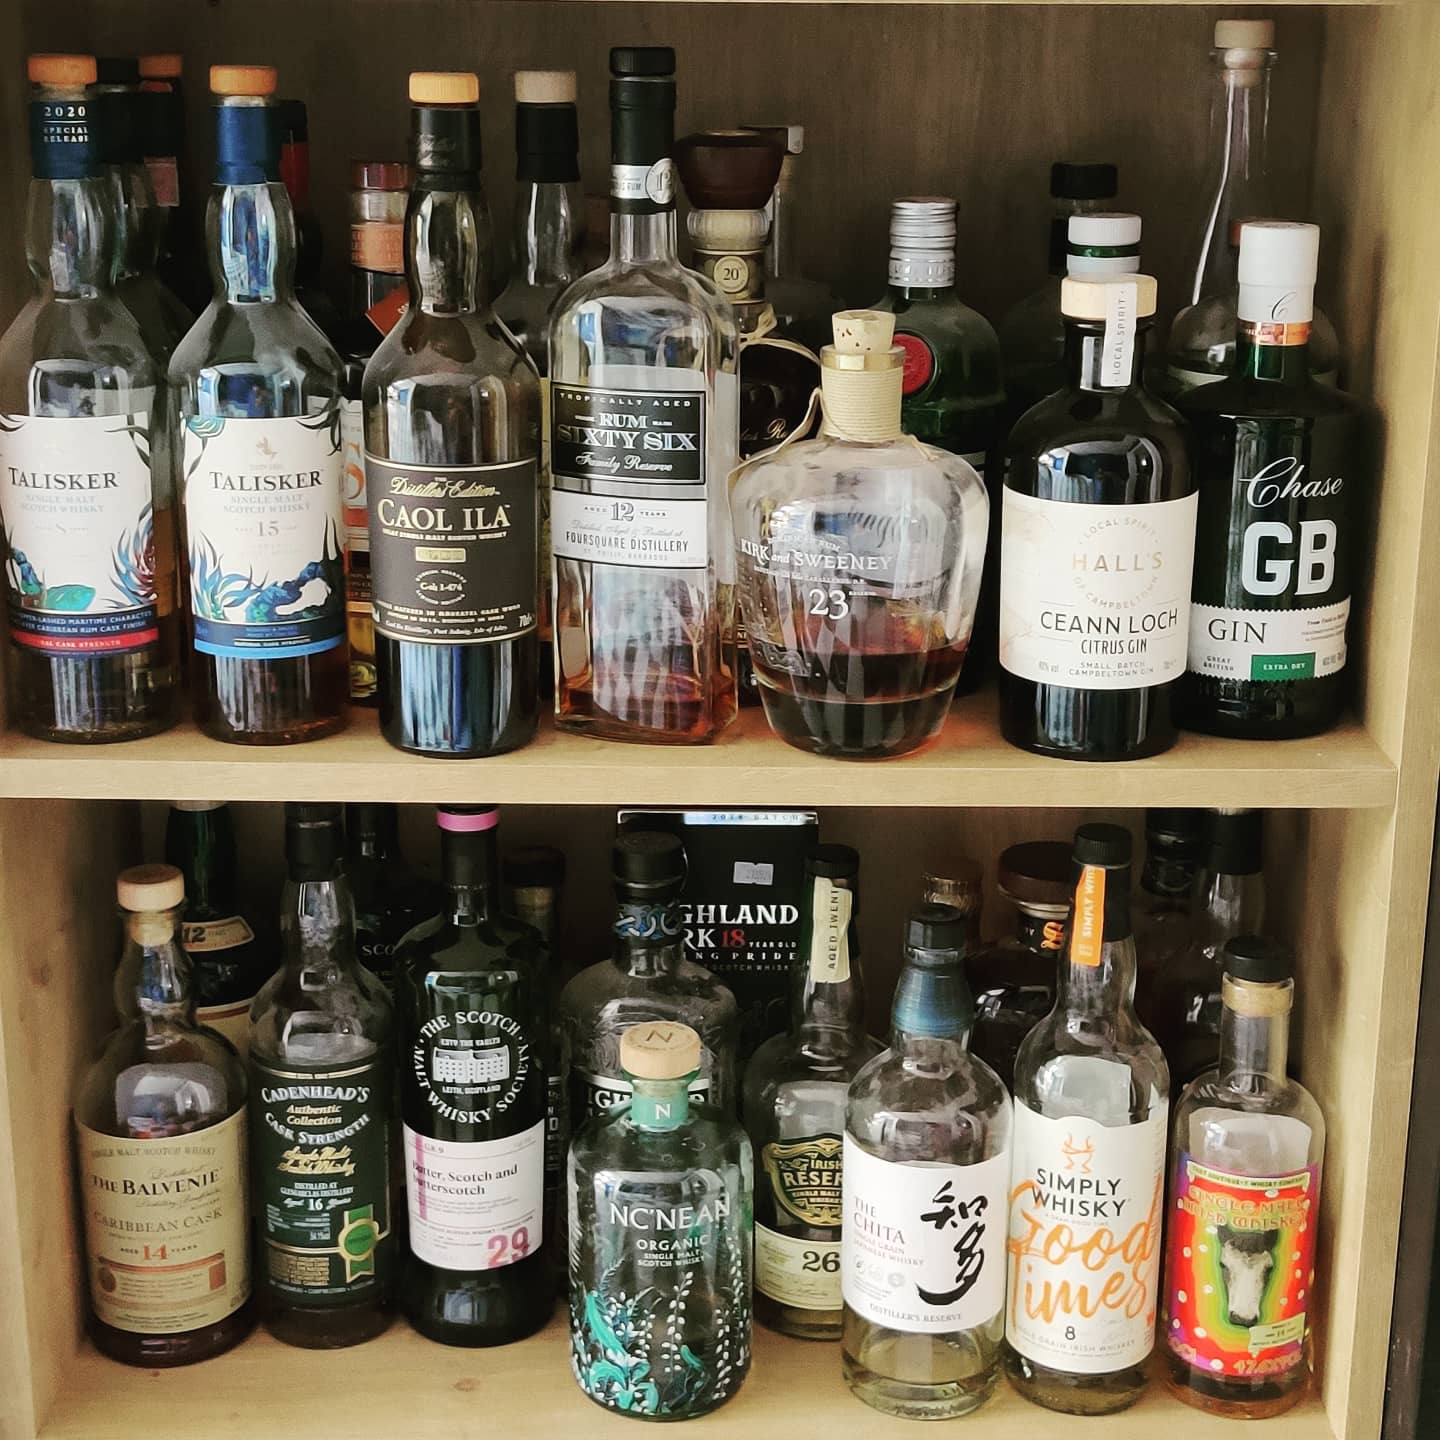 That's the spring-cleaning done then – "working" shelf in the kitchen sorted! Smokey top-left, rum in the middle, gin on the right, and the #shelfofhighballhappiness below.